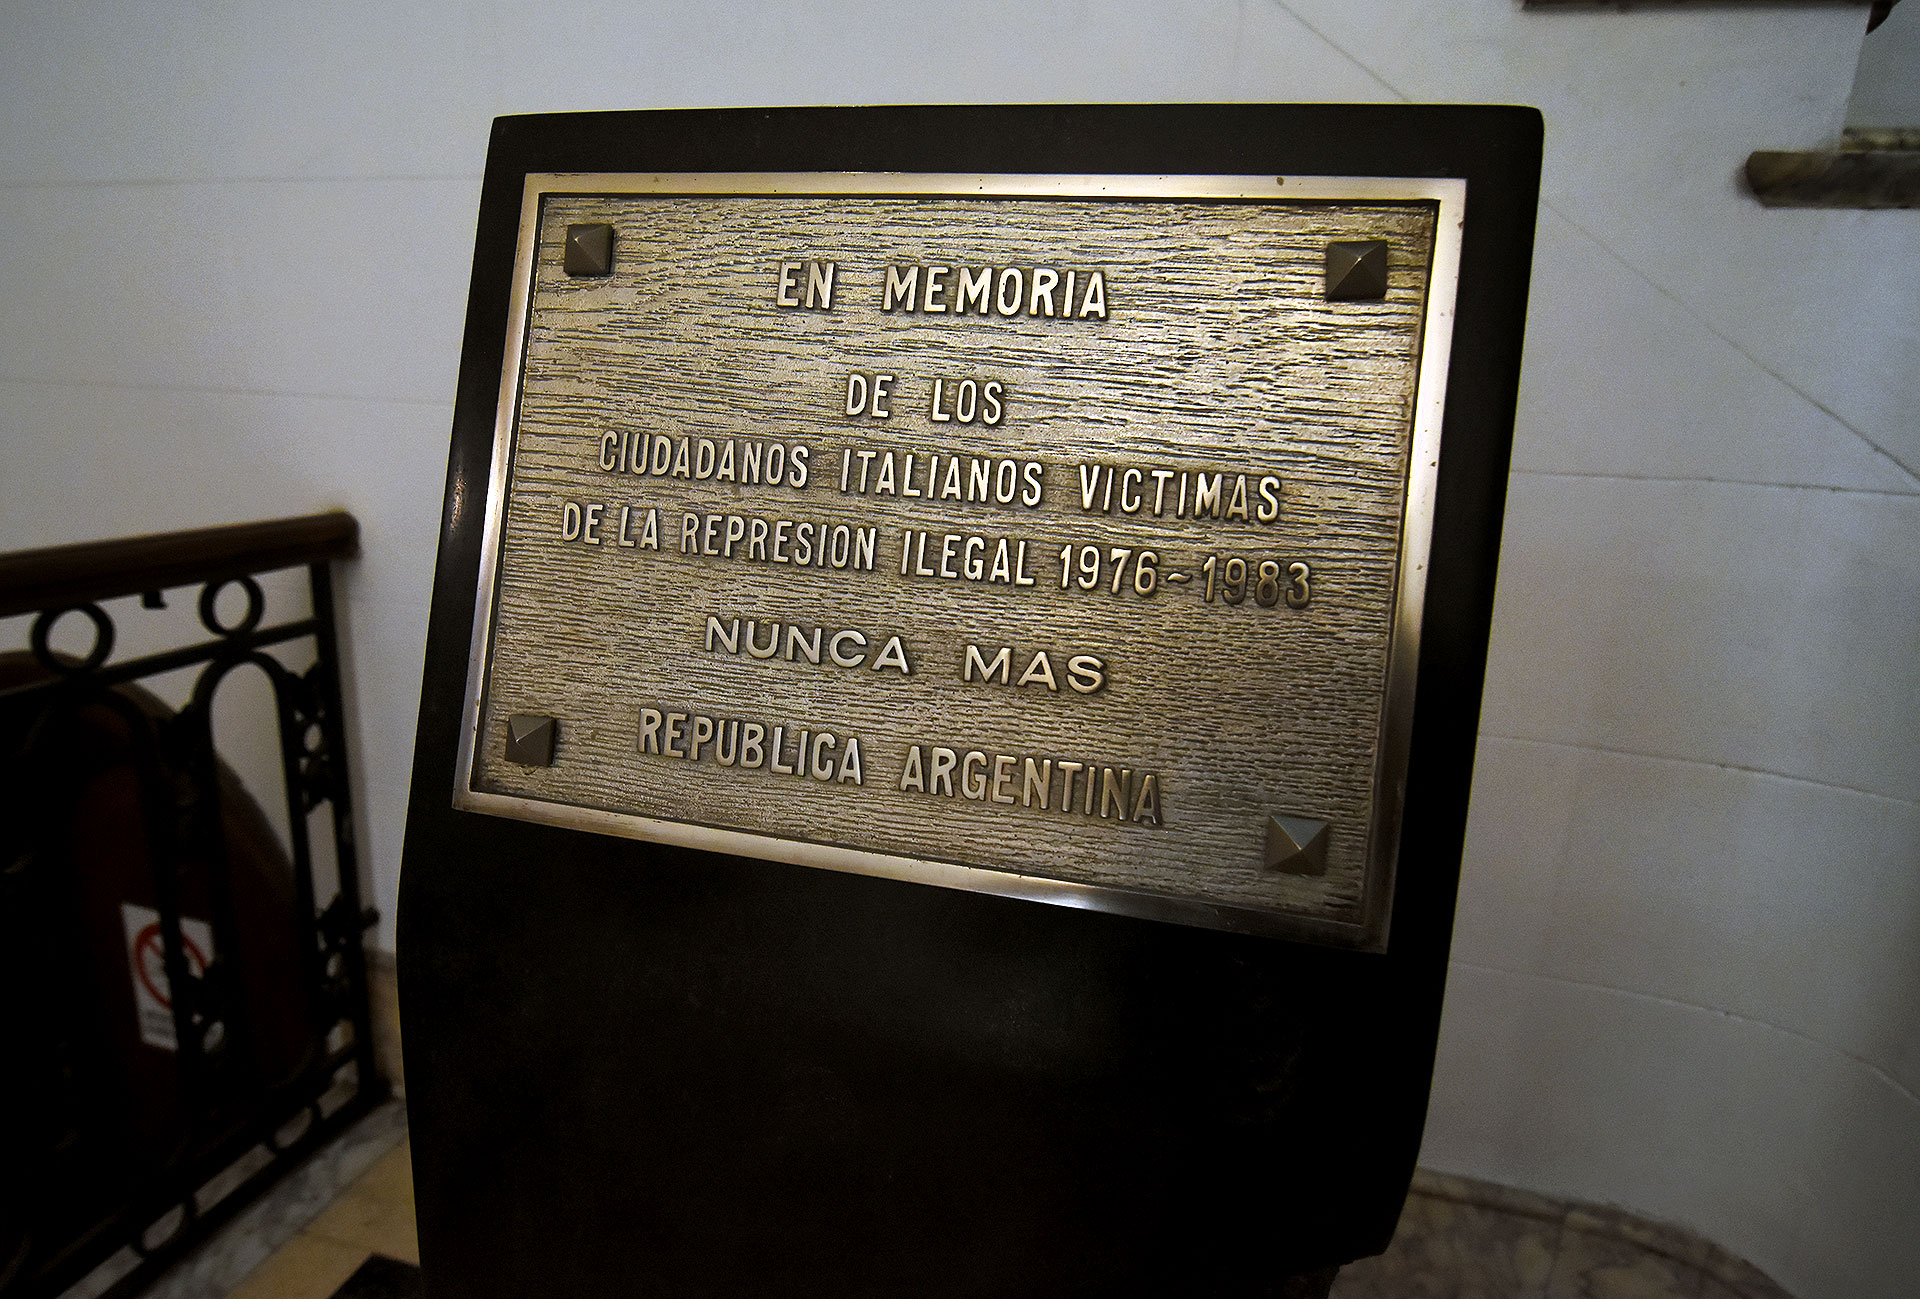 A plaque in memory of the Italian citizens who were victims of the last Argentine military dictatorship (Nicolás Stulberg)